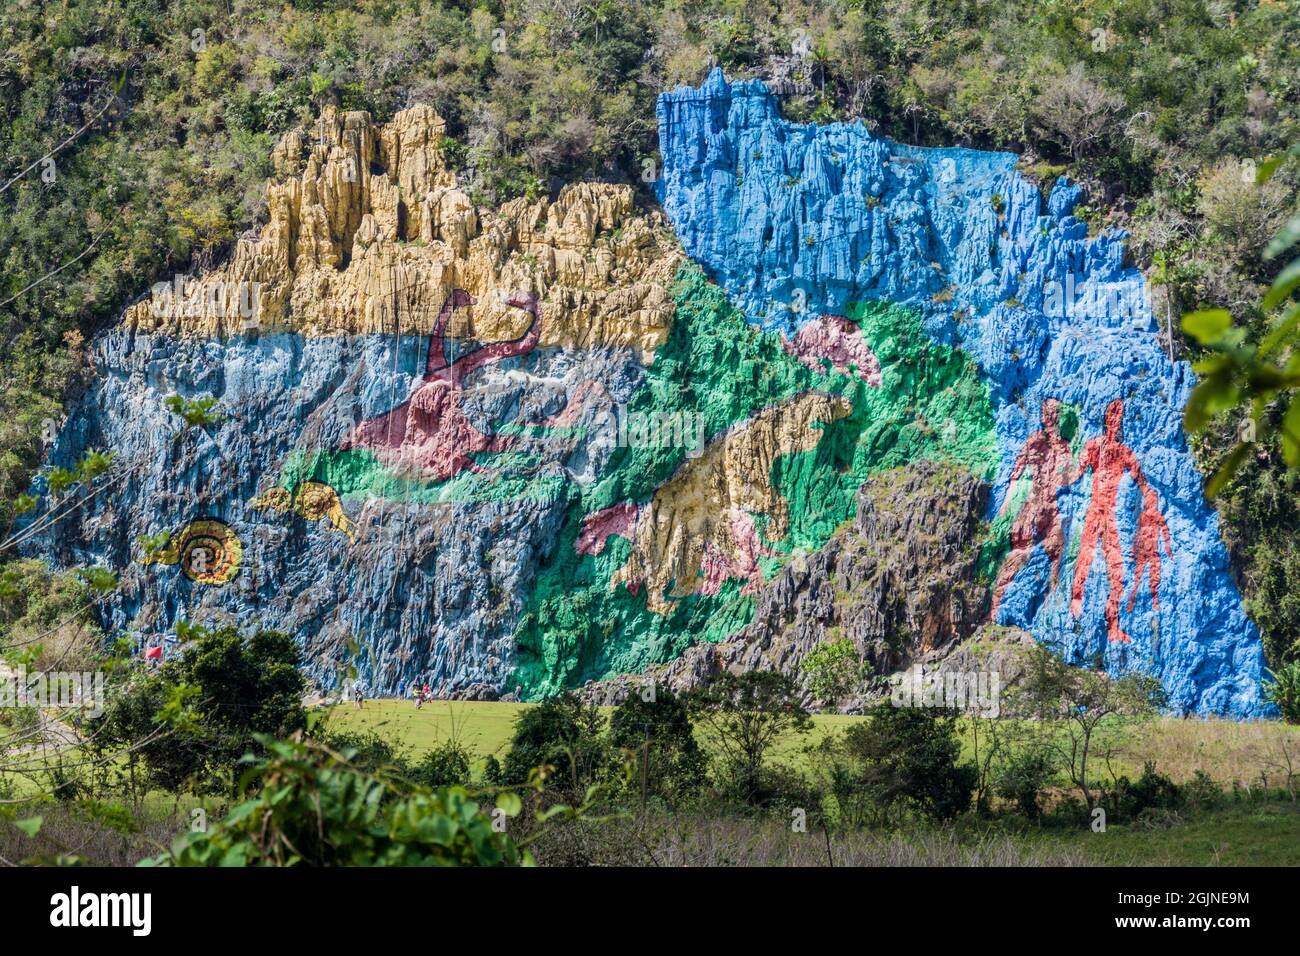 Mural de la Prehistoria The Mural of Prehistory painted on a cliff face in the Vinales valley, Cuba. Stock Photo